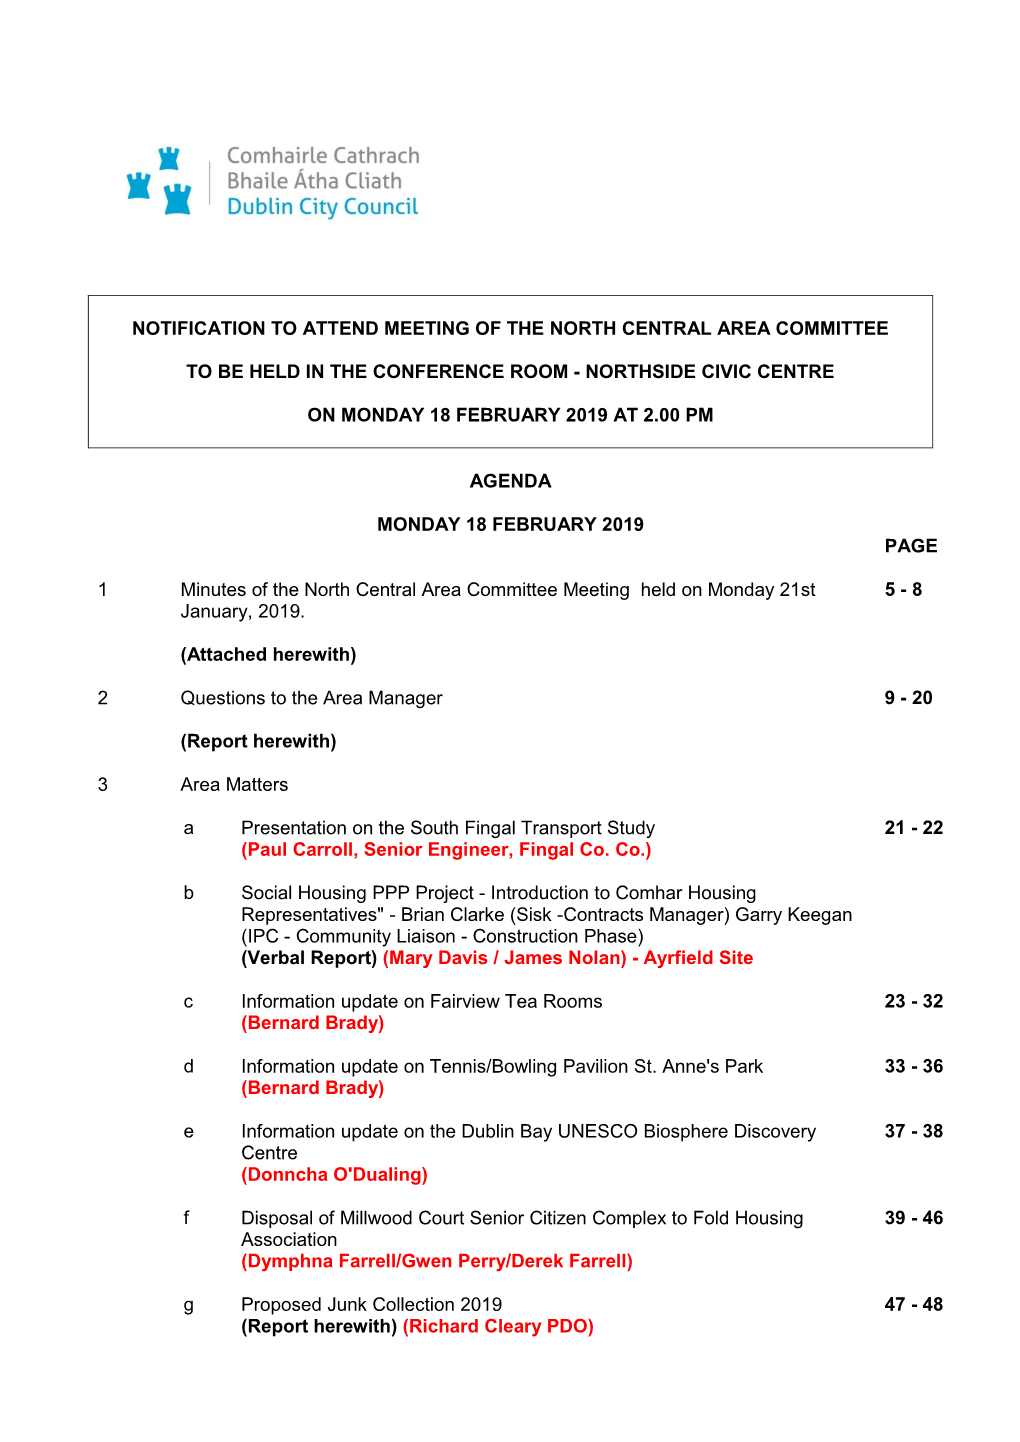 Agenda Document for North Central Area Committee, 18/02/2019 14:00